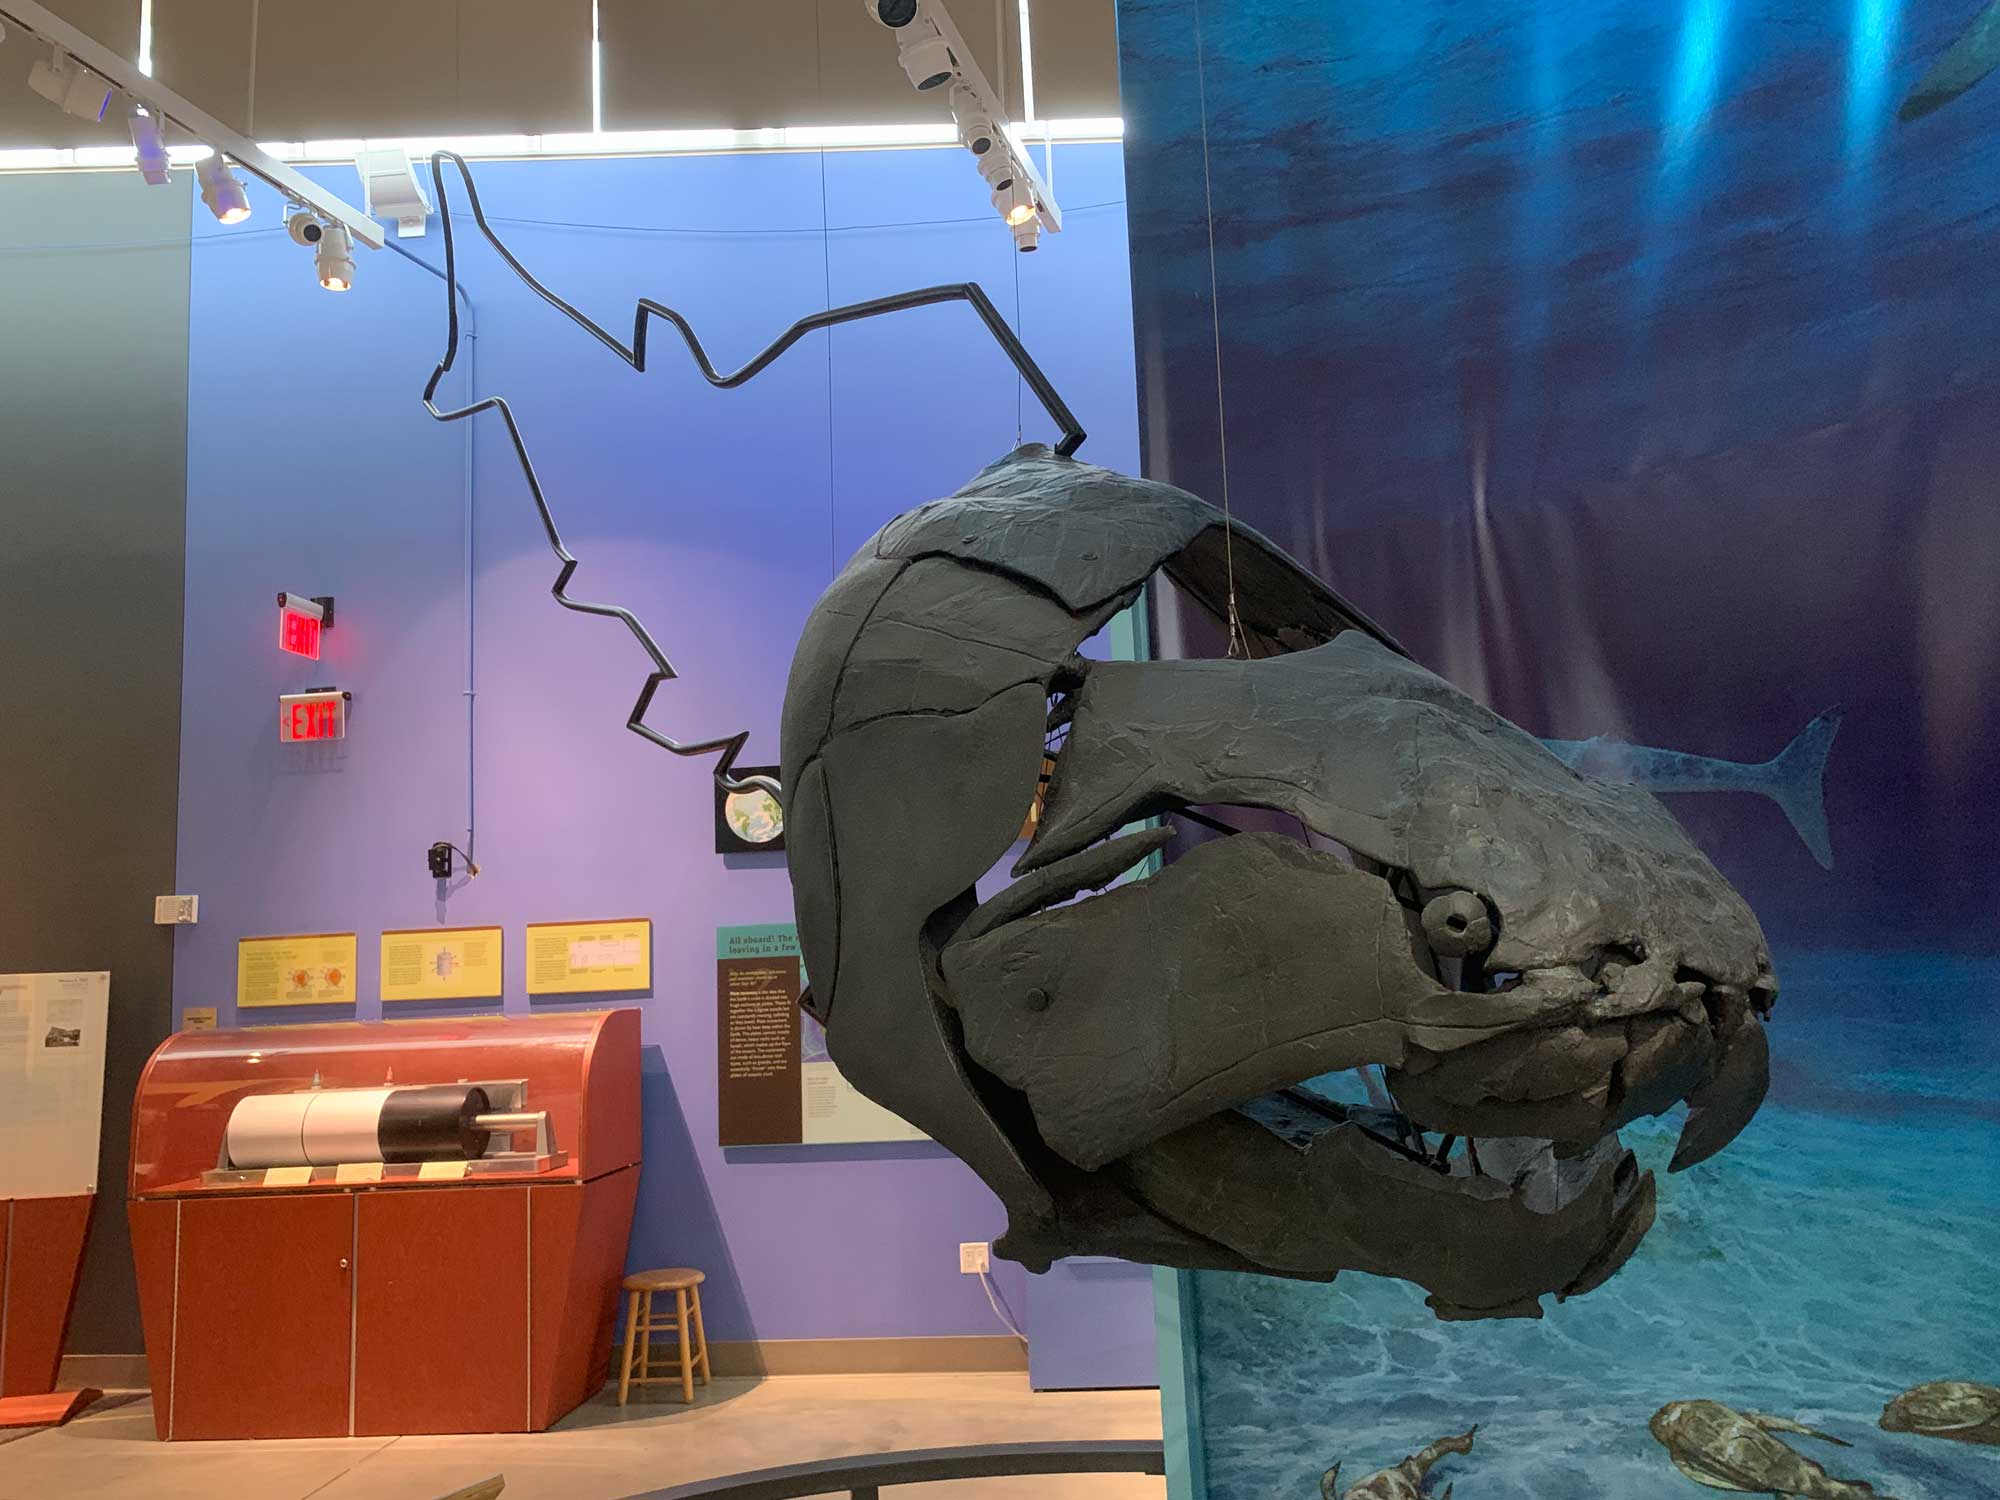 Photograph of a Dunkleosteus skull.